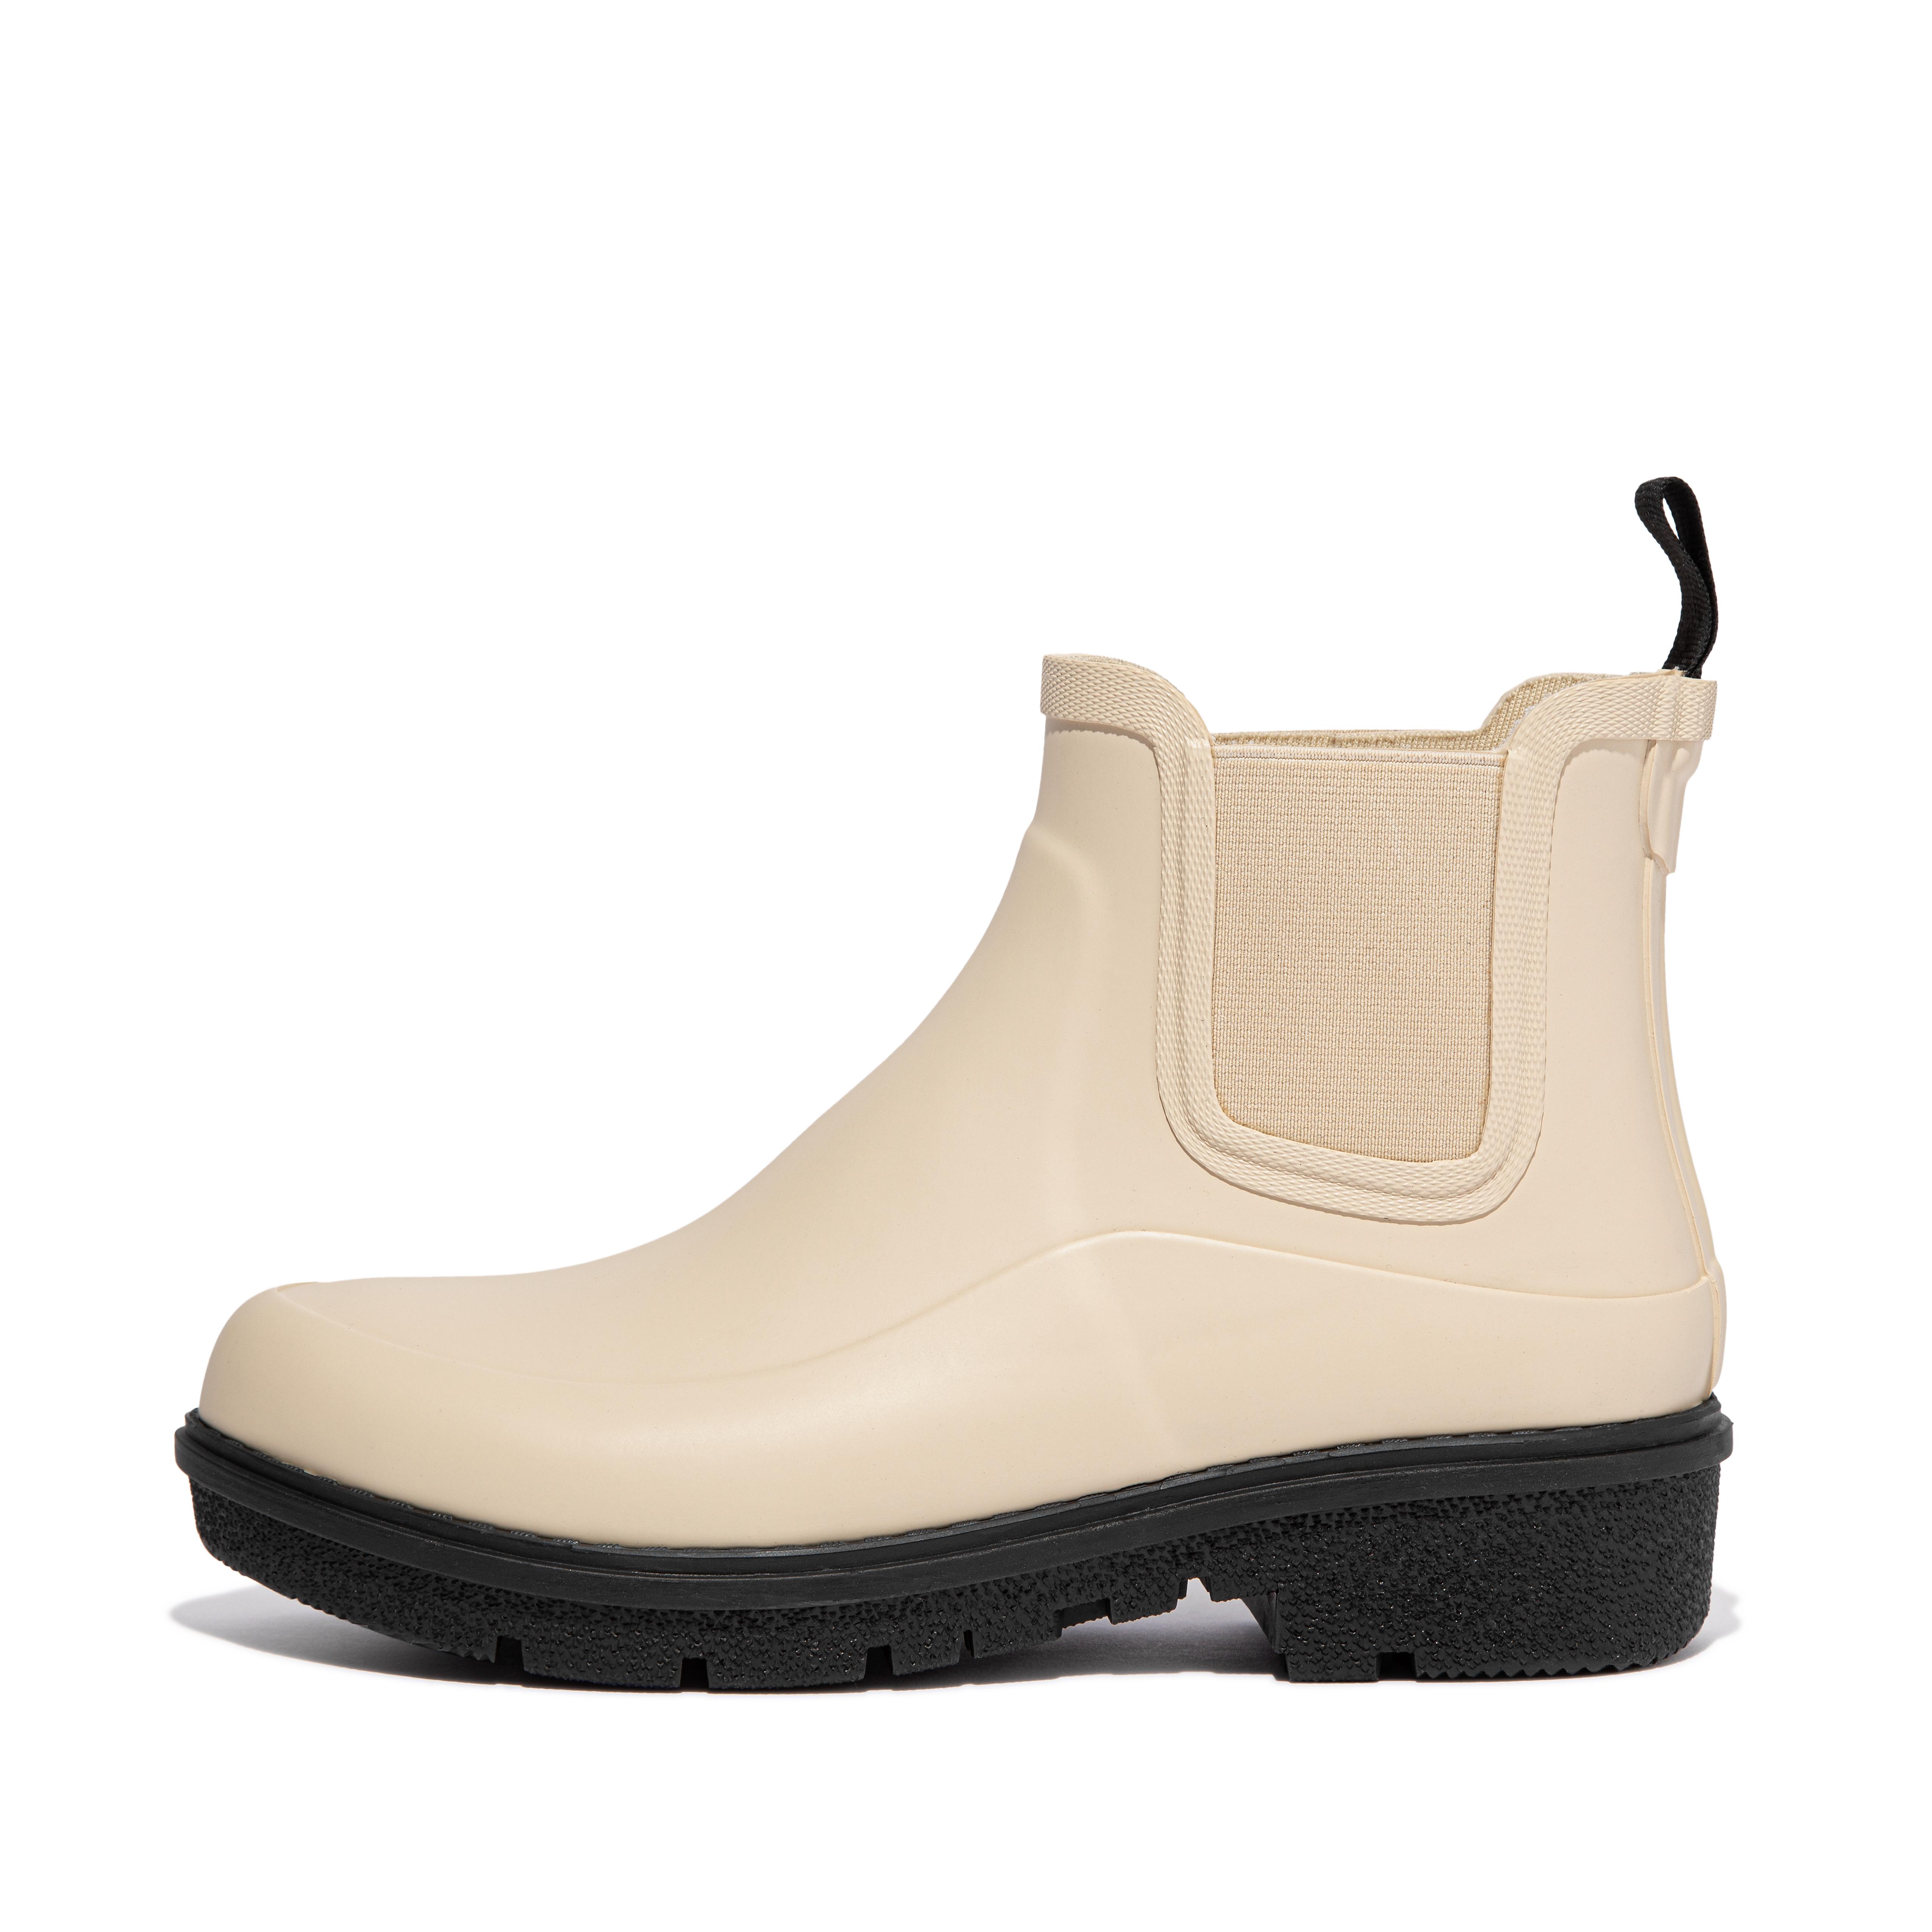 Wonderwelly Contrast Sole Chelsea Boots | FitFlop UK